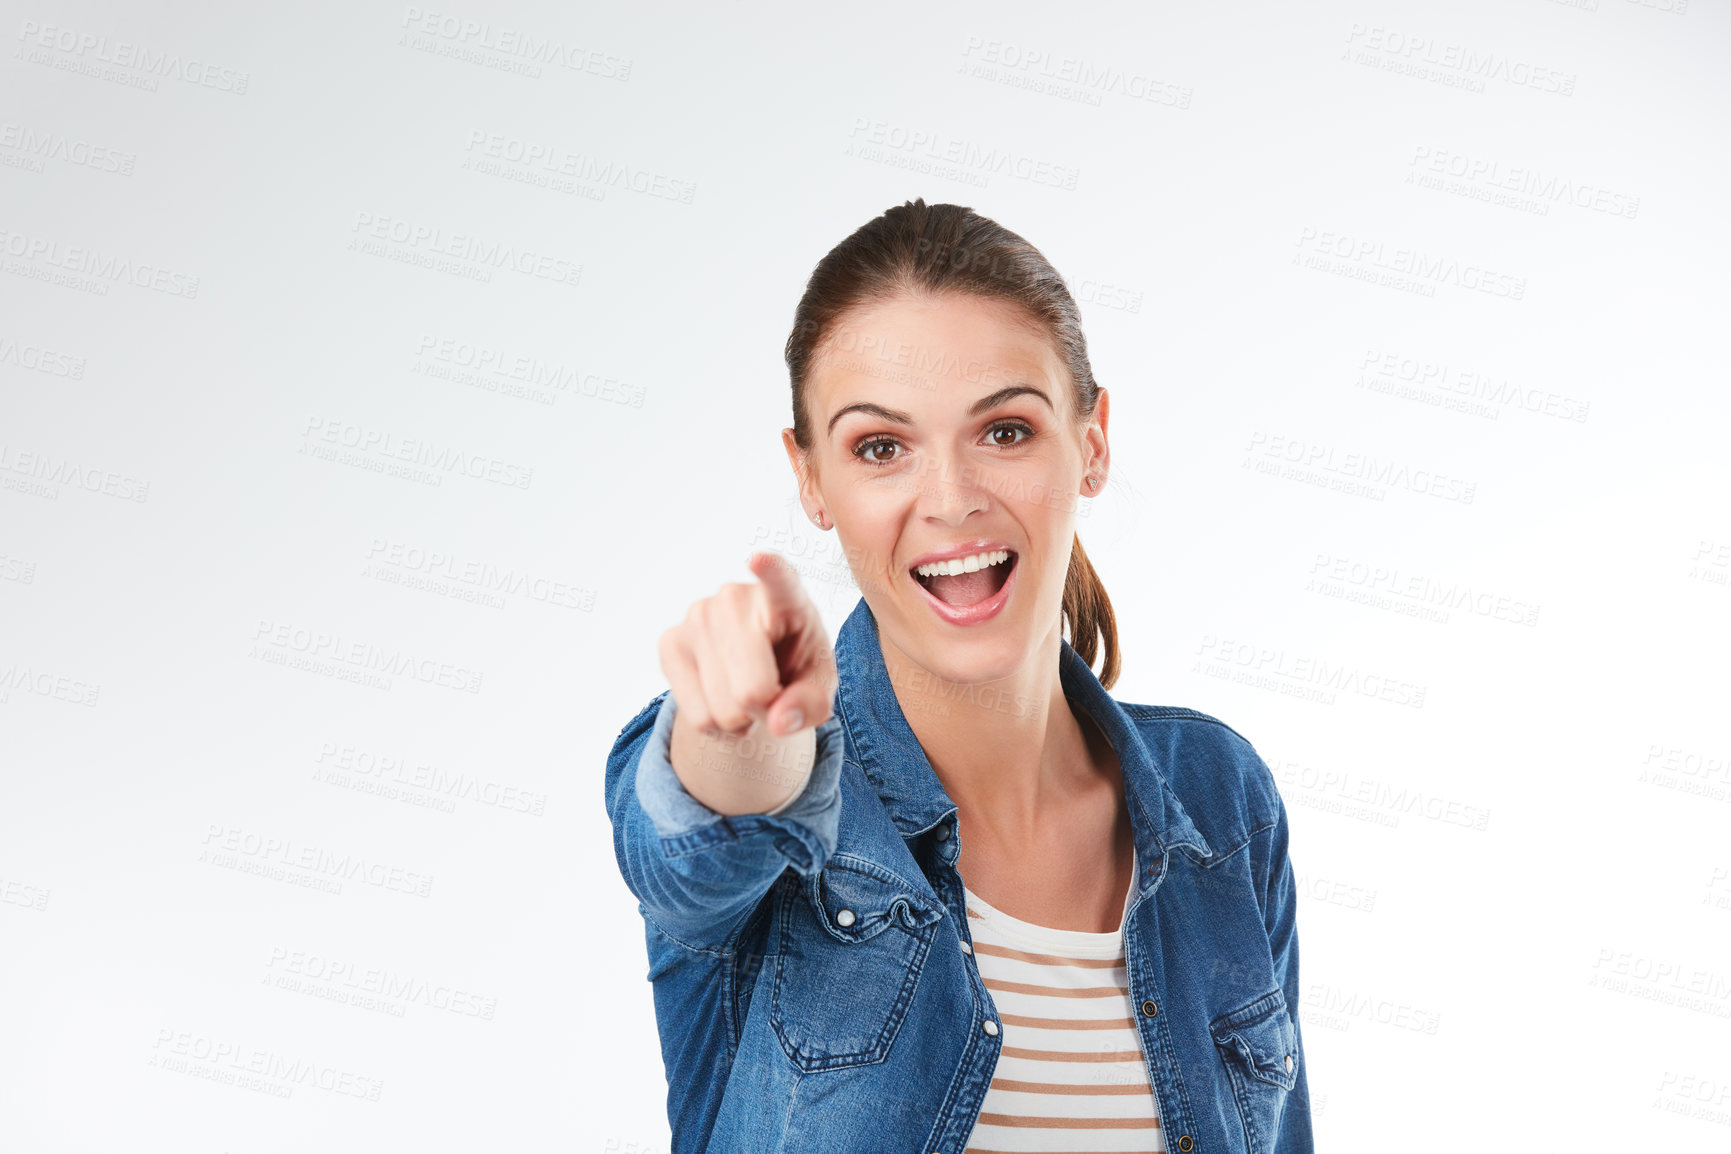 Buy stock photo Studio portrait of a young woman pointing against a grey background